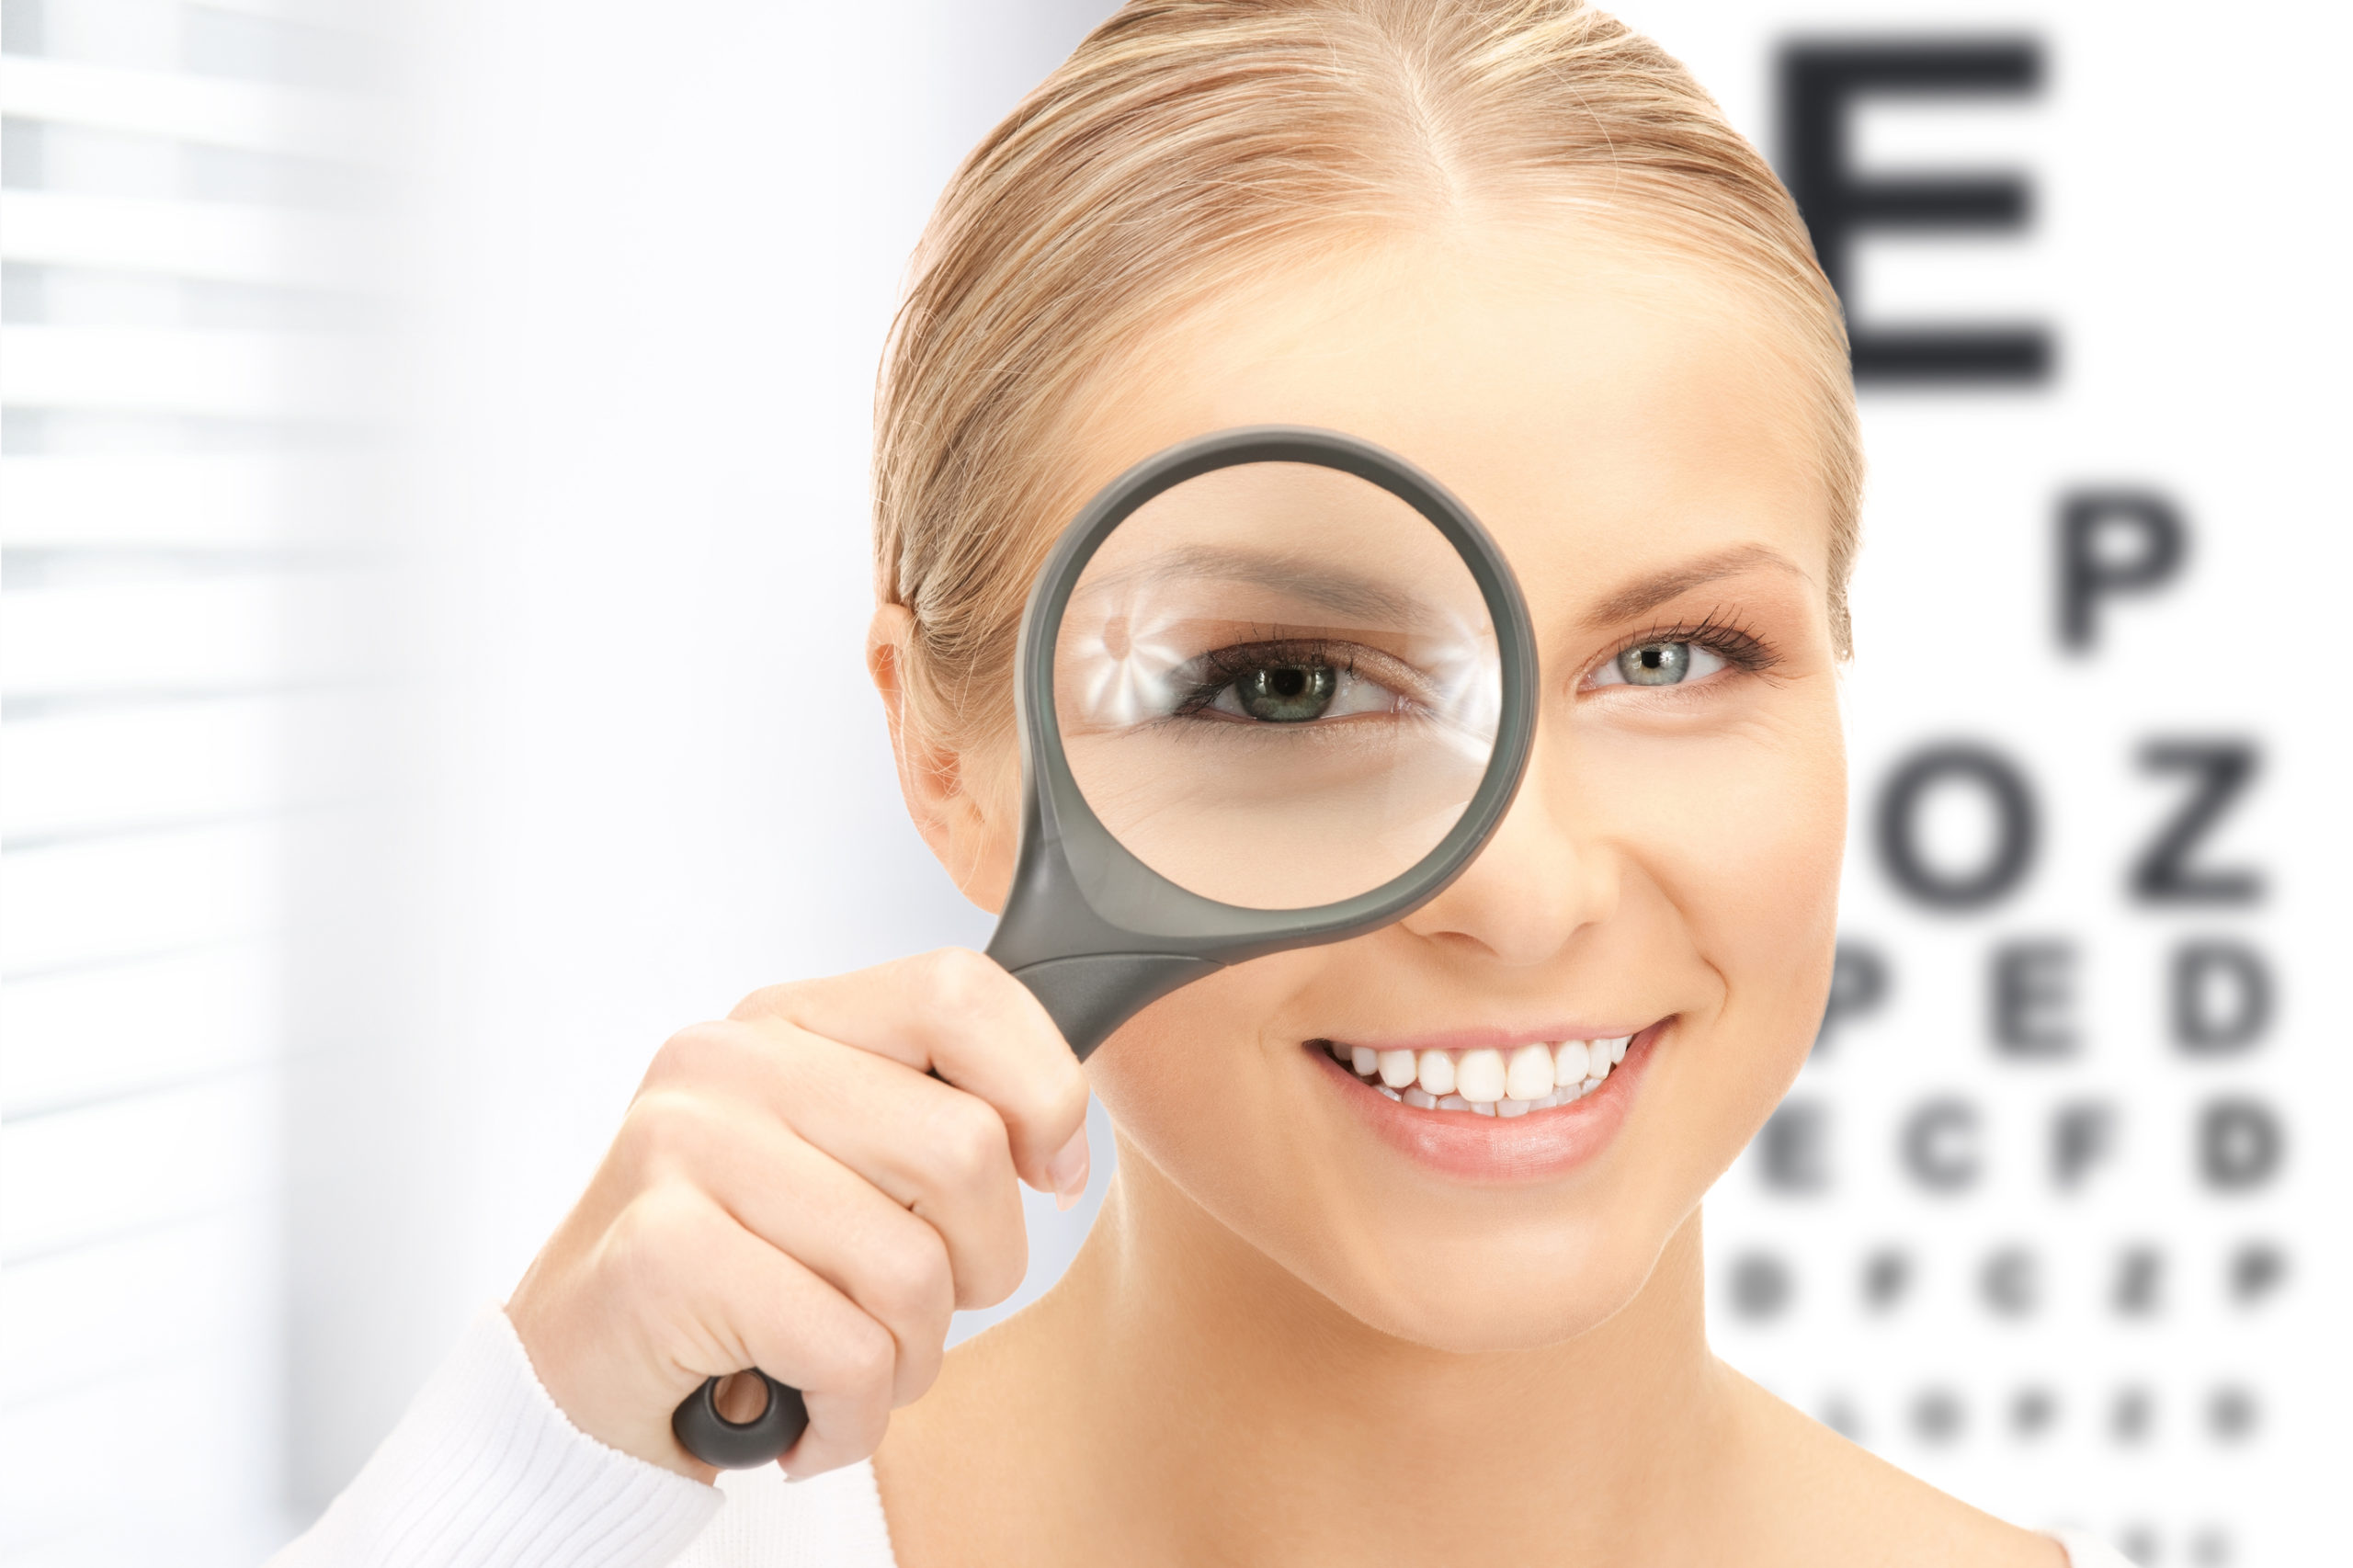 woman with clear vision using magnifying glass